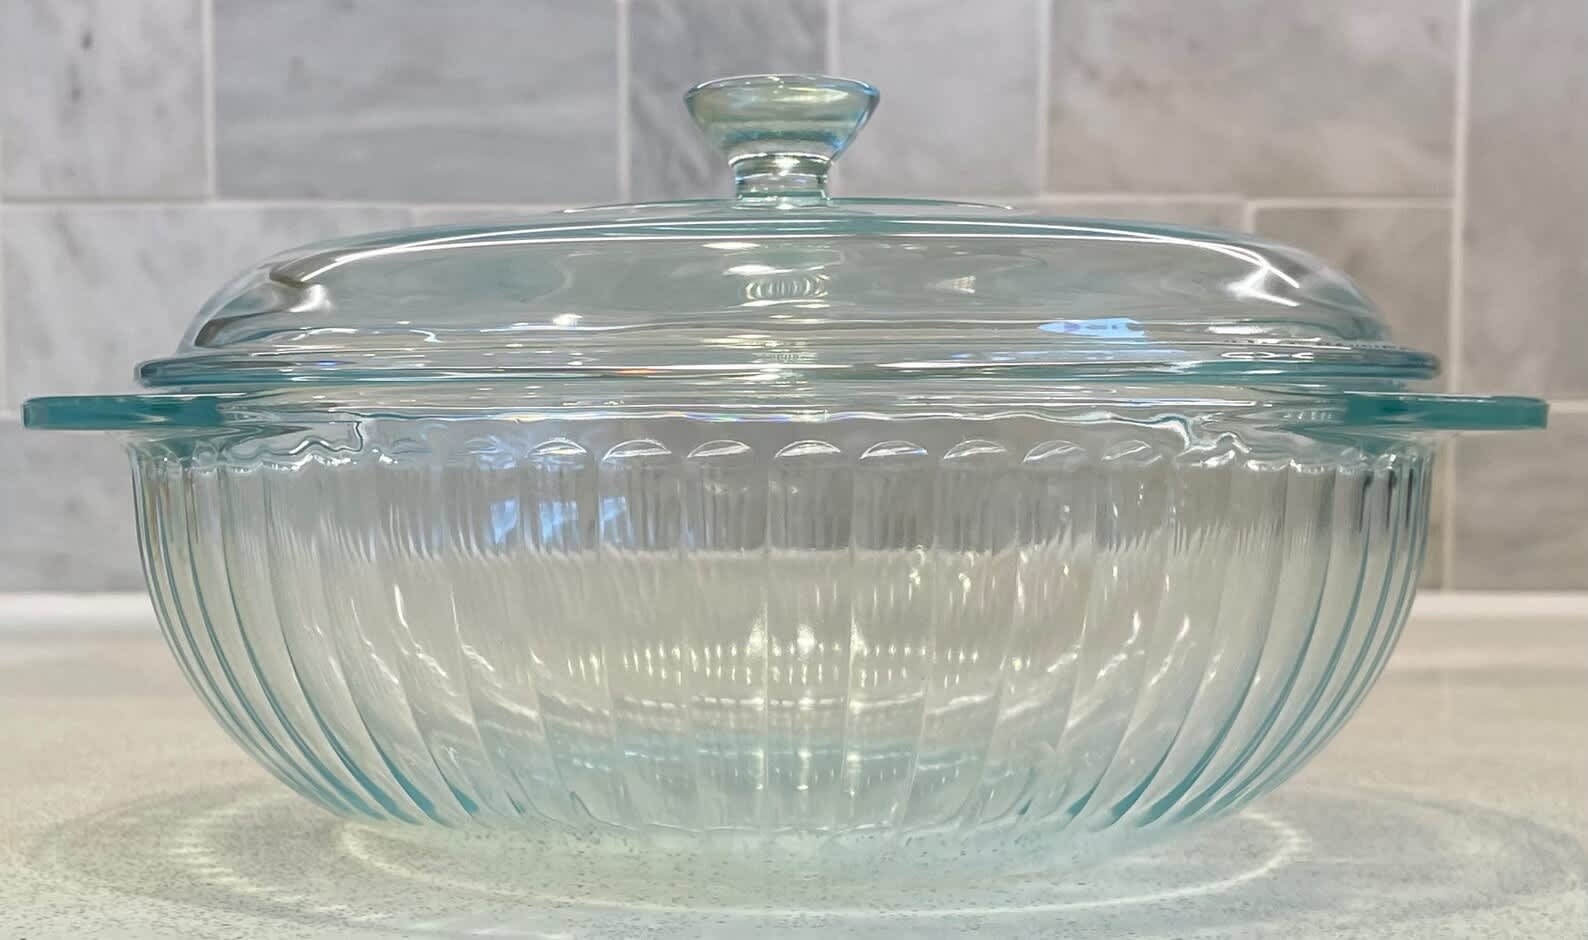 Vintage Casserole Dish With Lid Oval Ribbed Clear Casserole 